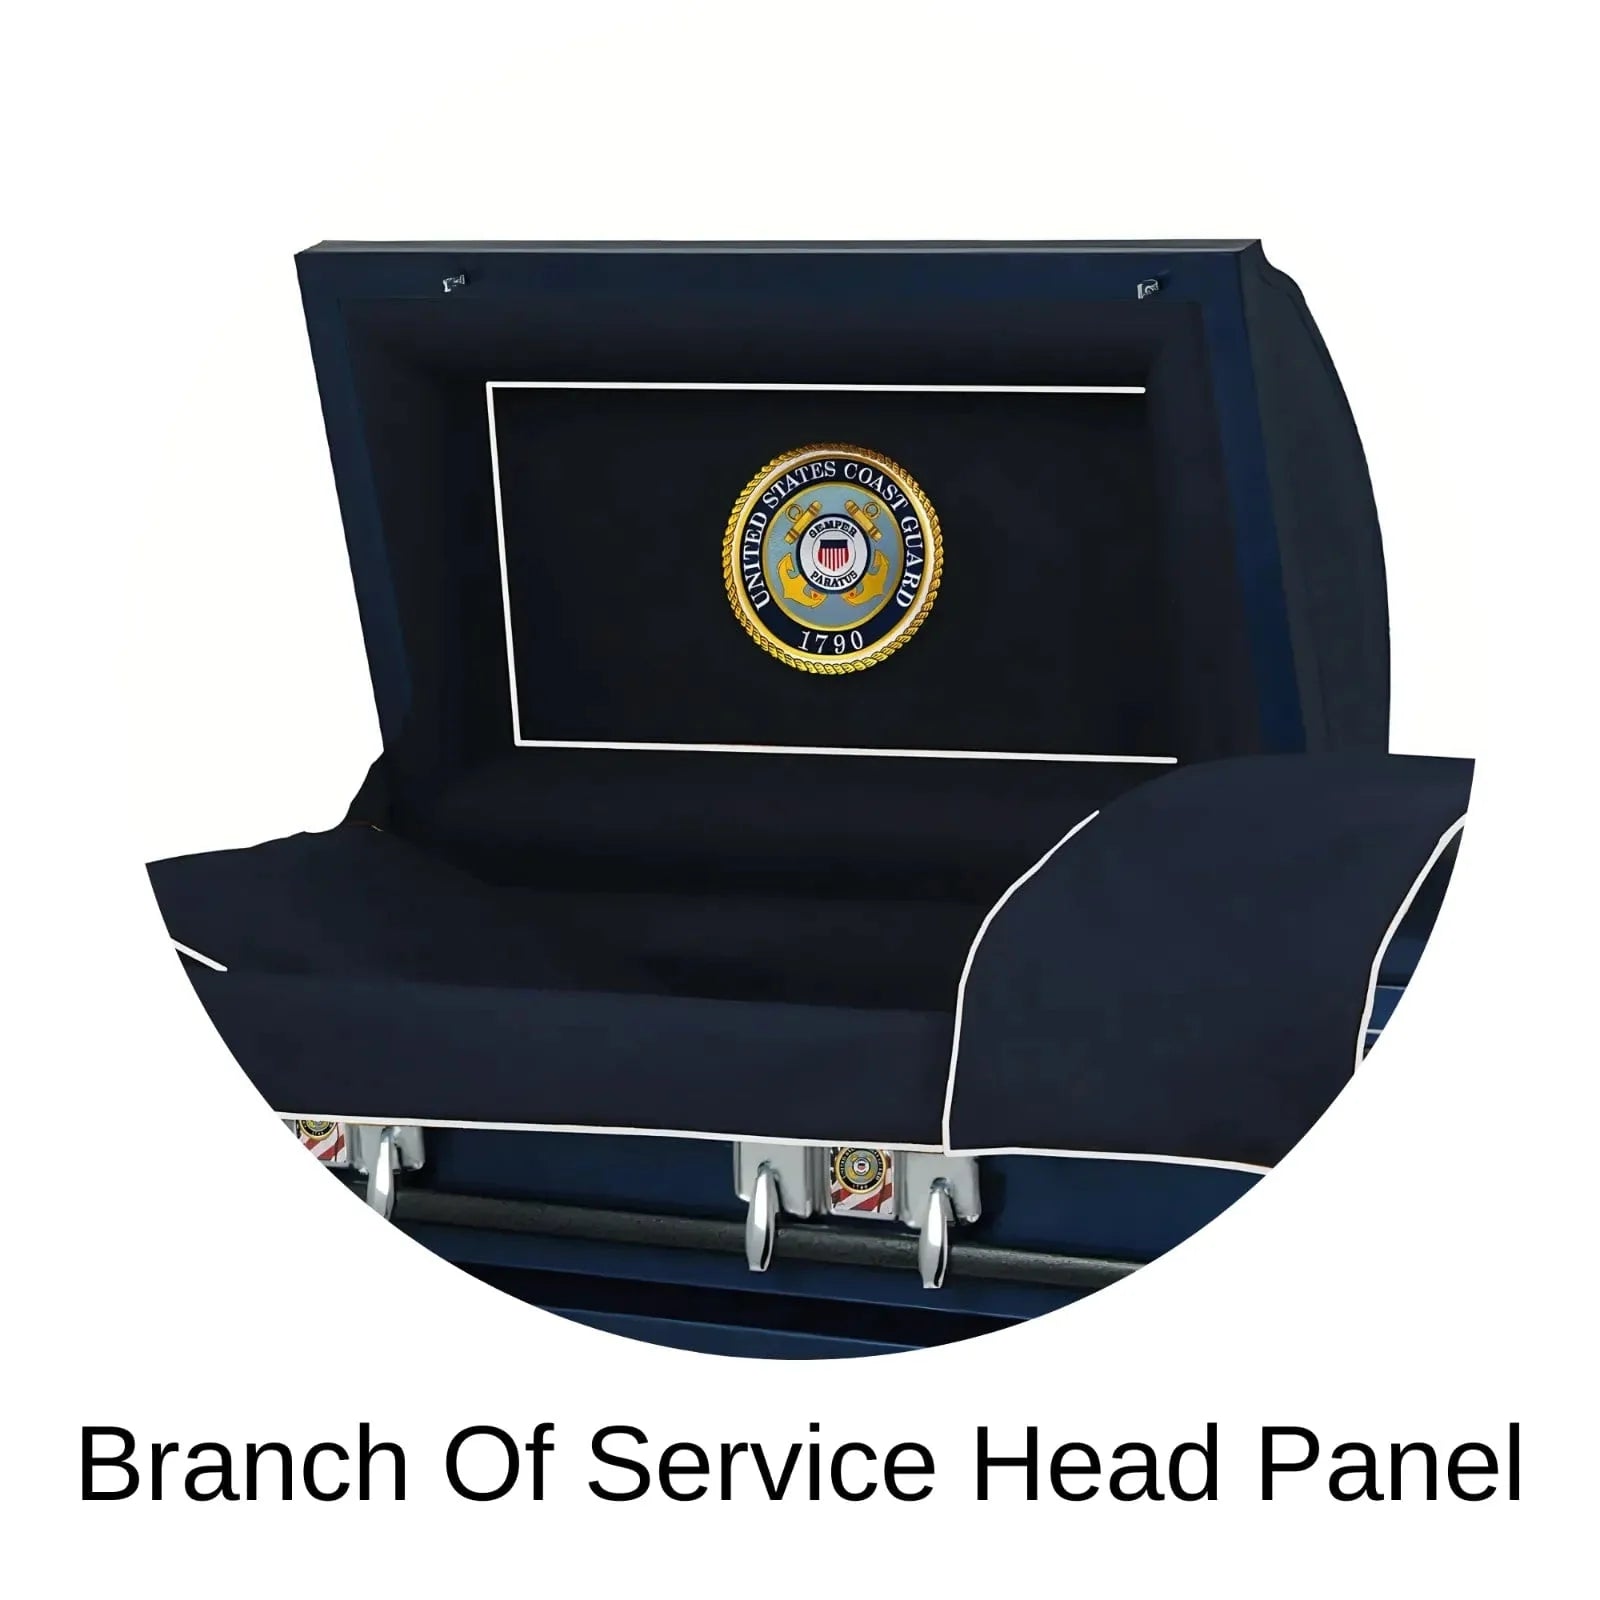 Coast Guard Casket with Branch of Service Head Panel